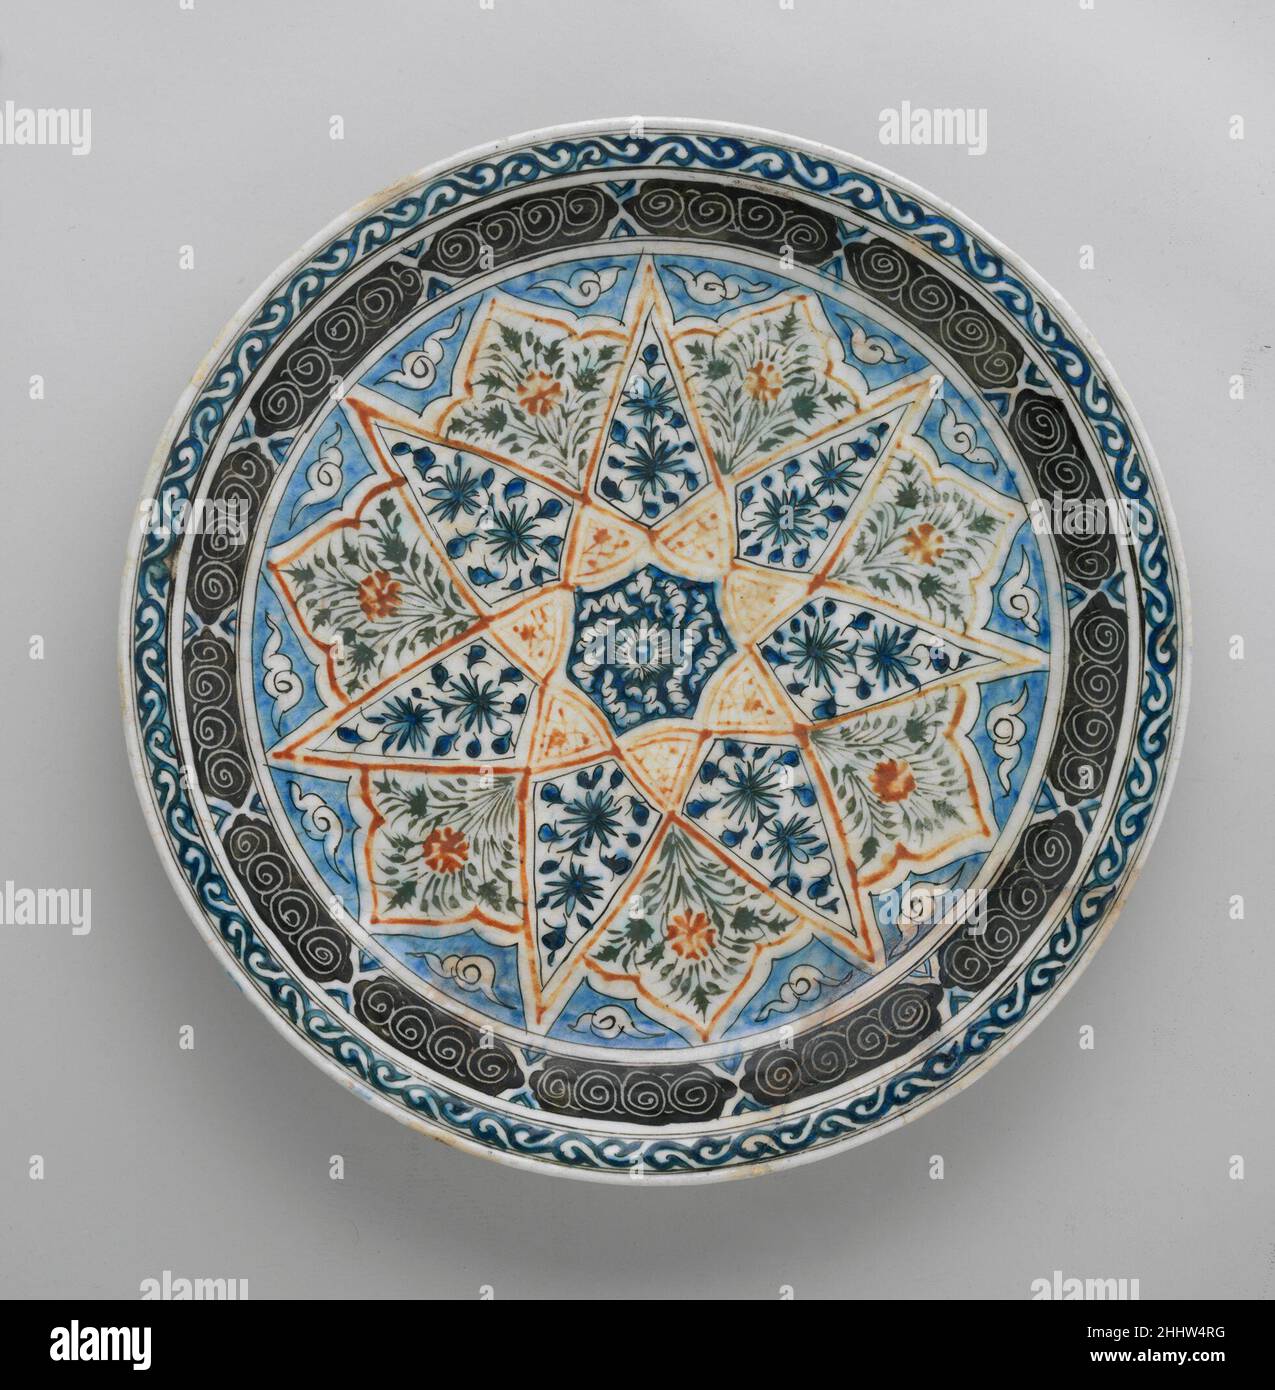 Plate with Vegetal Decoration in a Seven-pointed Star 17th century. Plate with Vegetal Decoration in a Seven-pointed Star  444476 Stock Photo